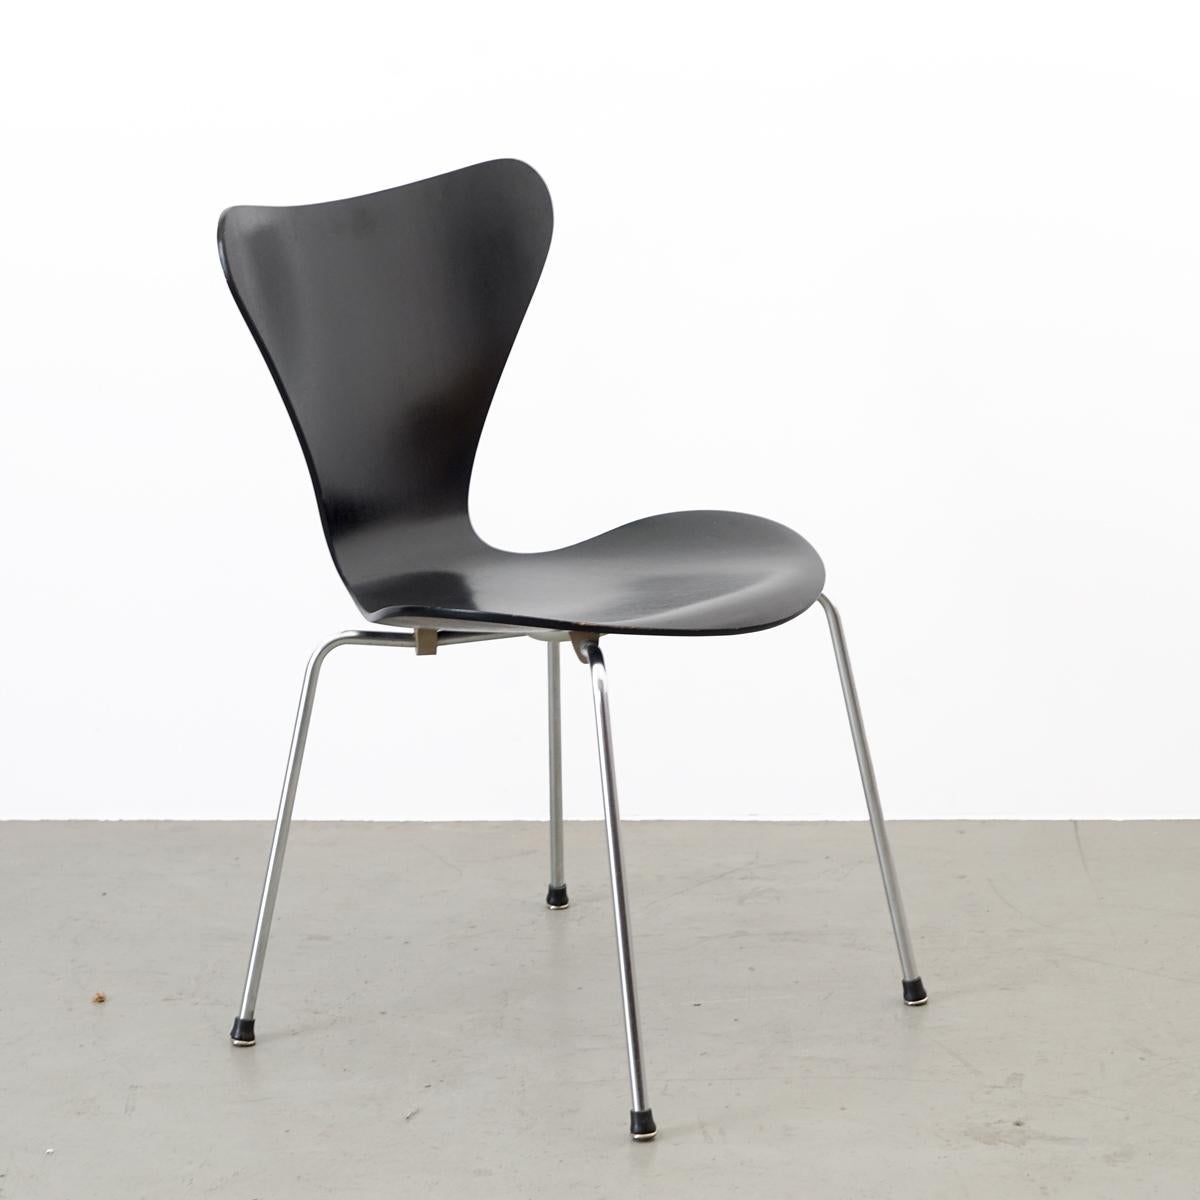 Iconic chair model 3107 from the 7 series designed by Arne Jacobsen and manufactured by Fritz Hansen, Denmark in the 1950s. This series was designed in 1955 and debuted in Sweden at the Helsingborg exhibition. This chair is sometimes called the